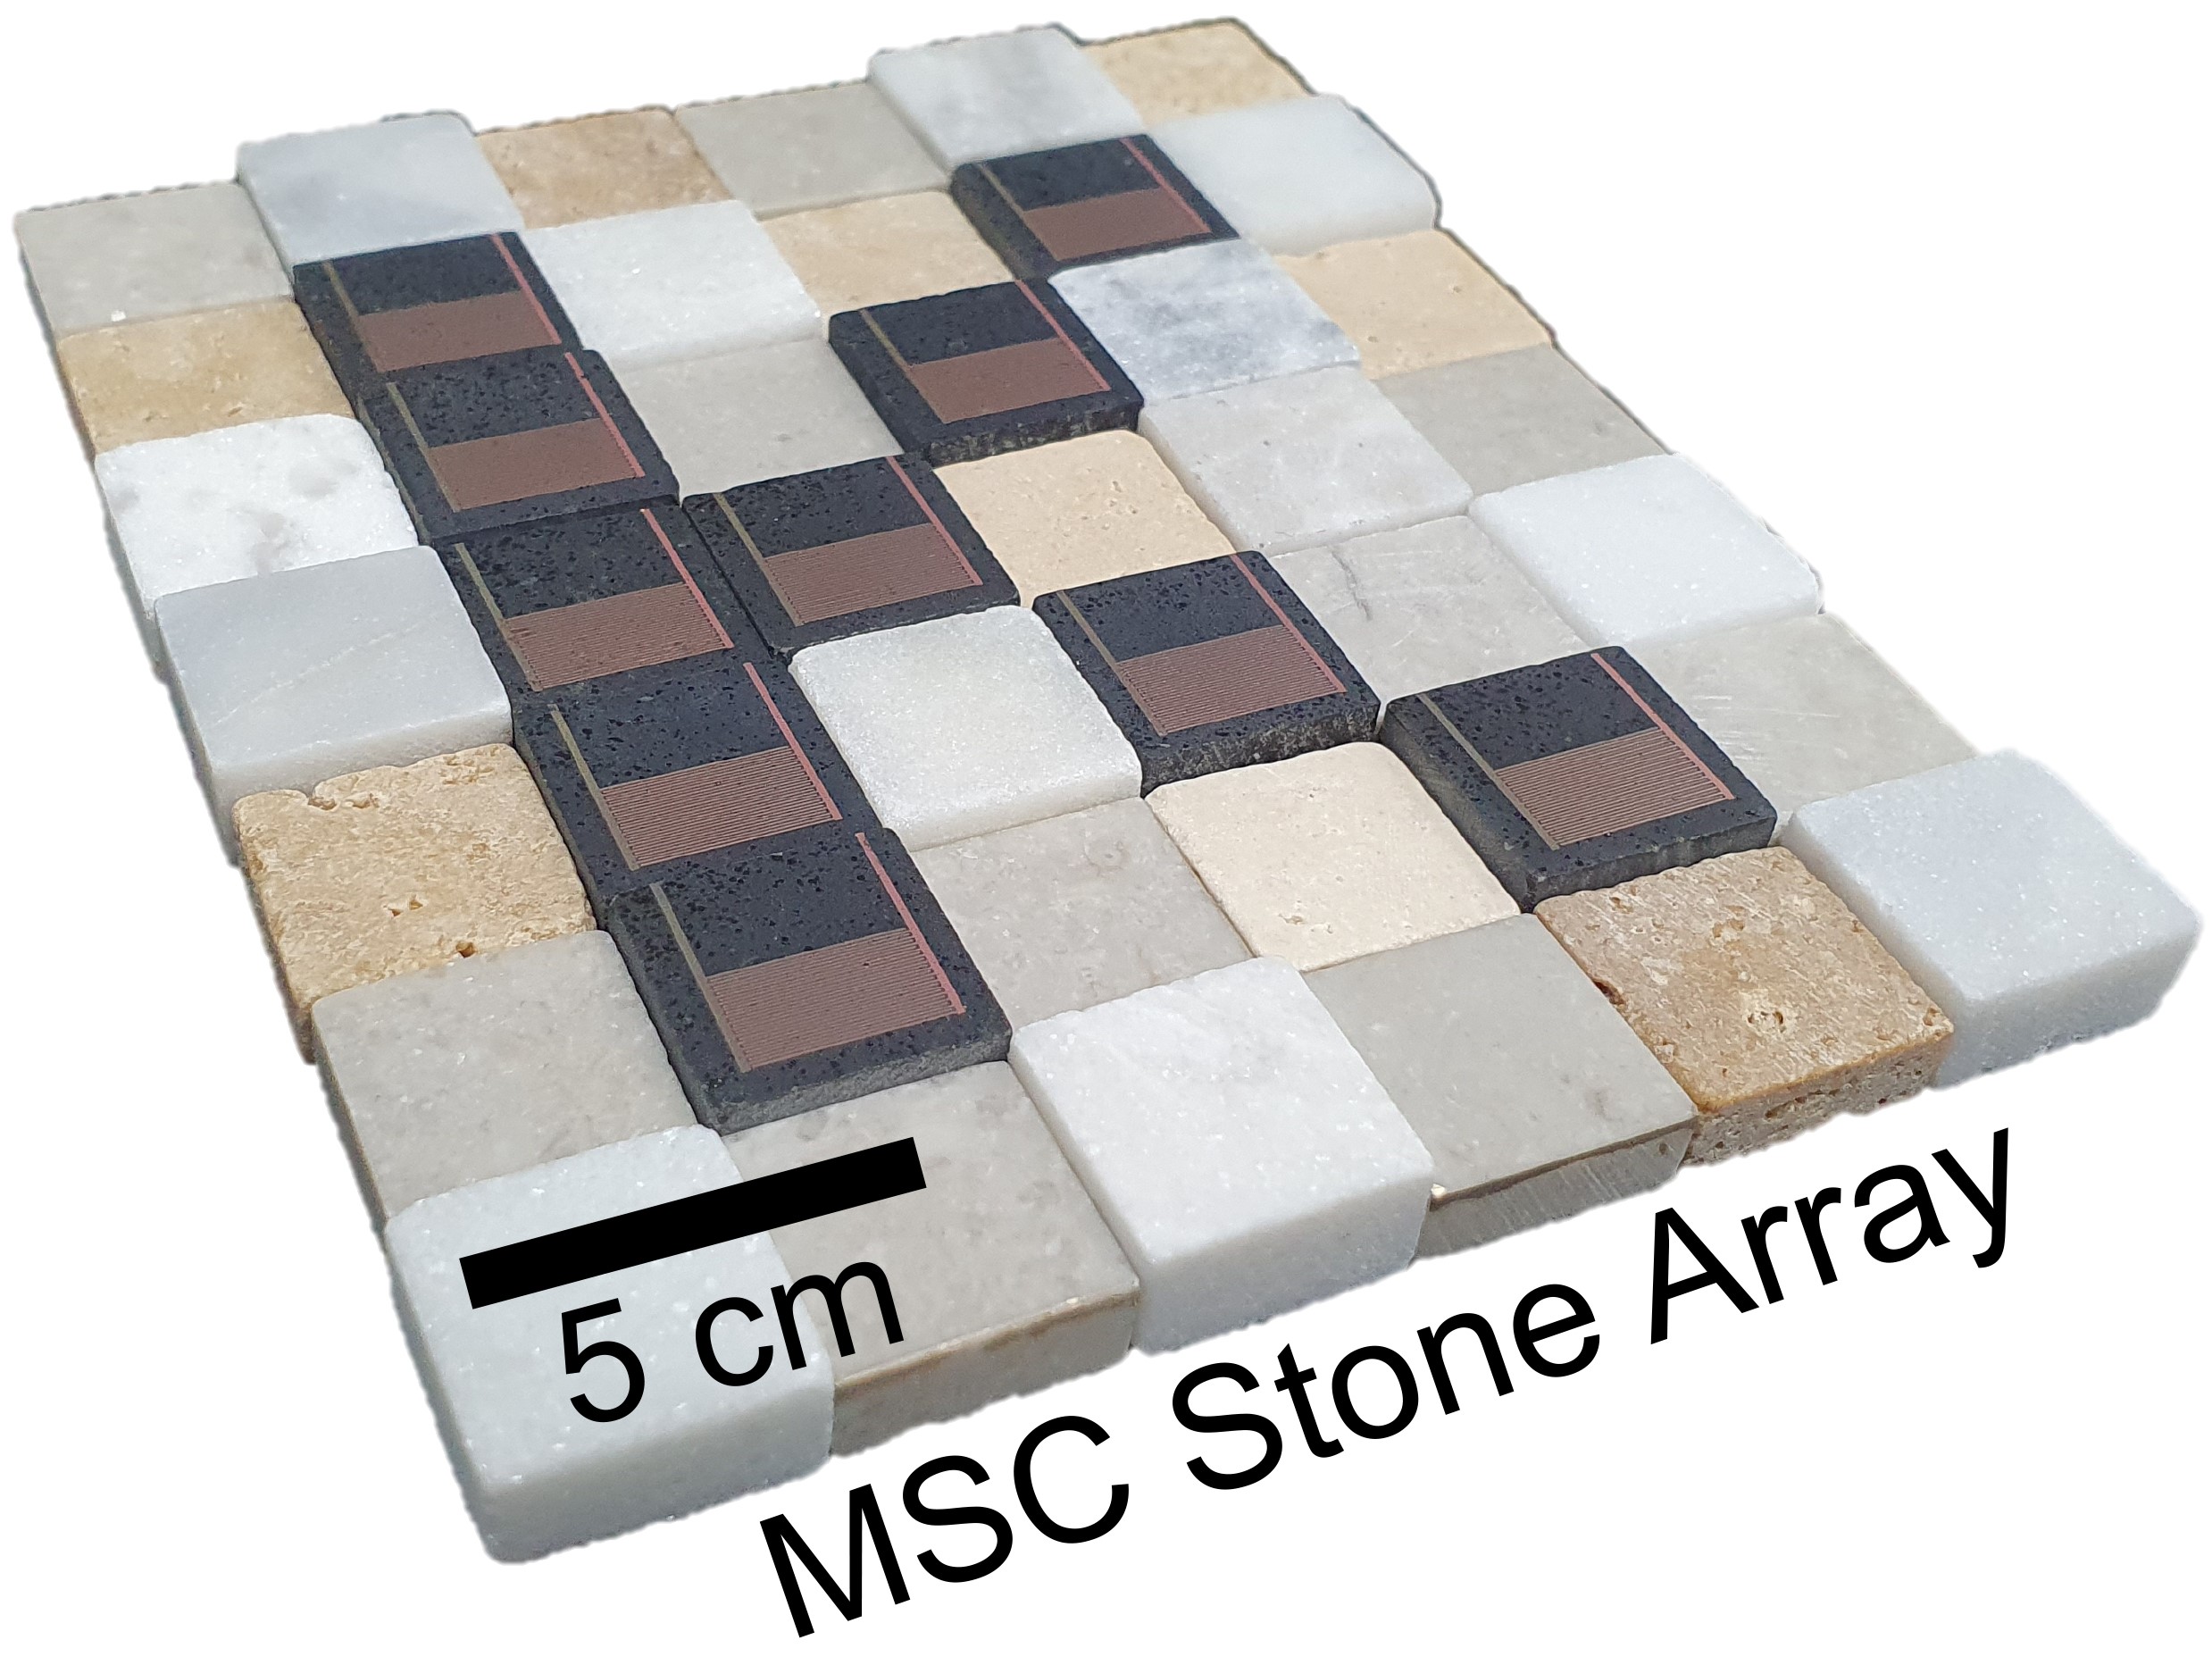 Interconnected microenergy devices built on marble tiles create customizable 3D power supply systems.